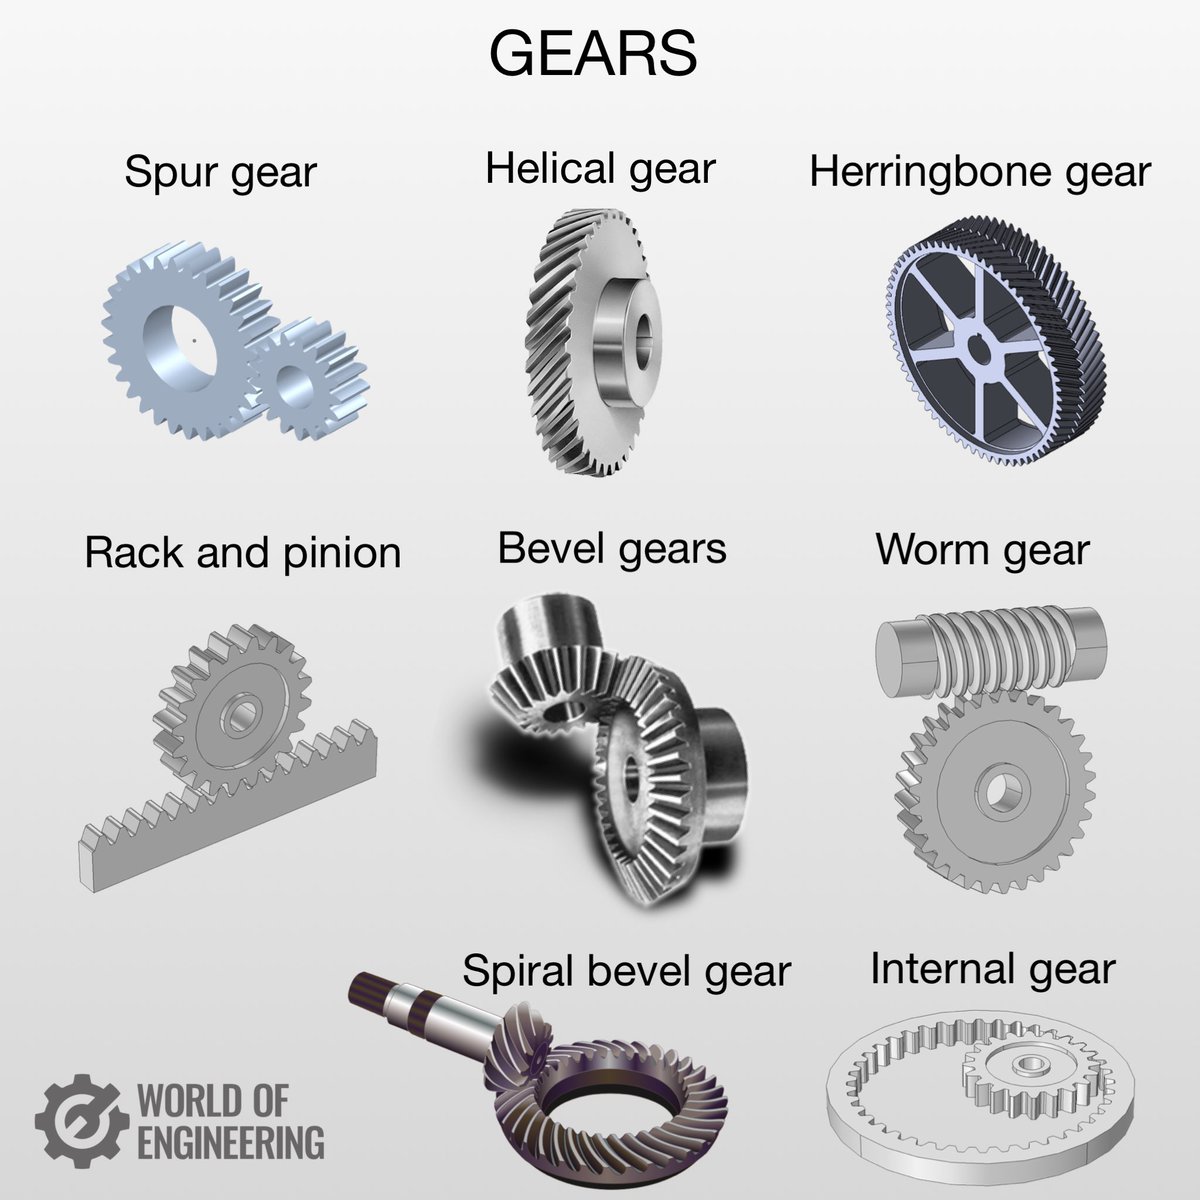 World of Engineering on X: A gear is a rotating circular machine